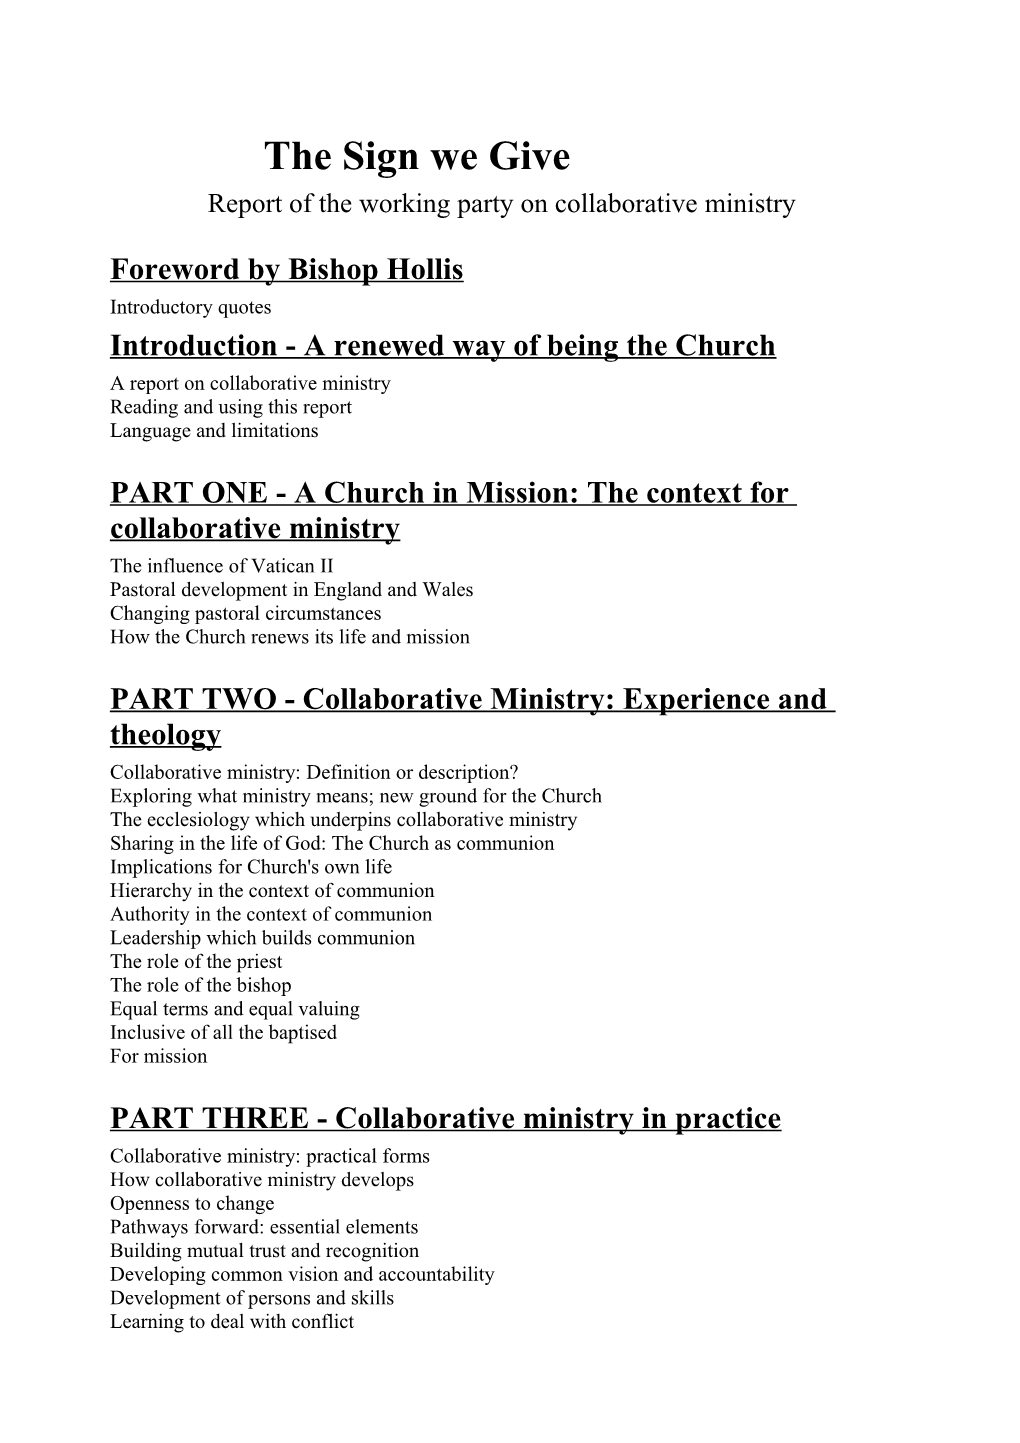 Report of the Working Party on Collaborative Ministry